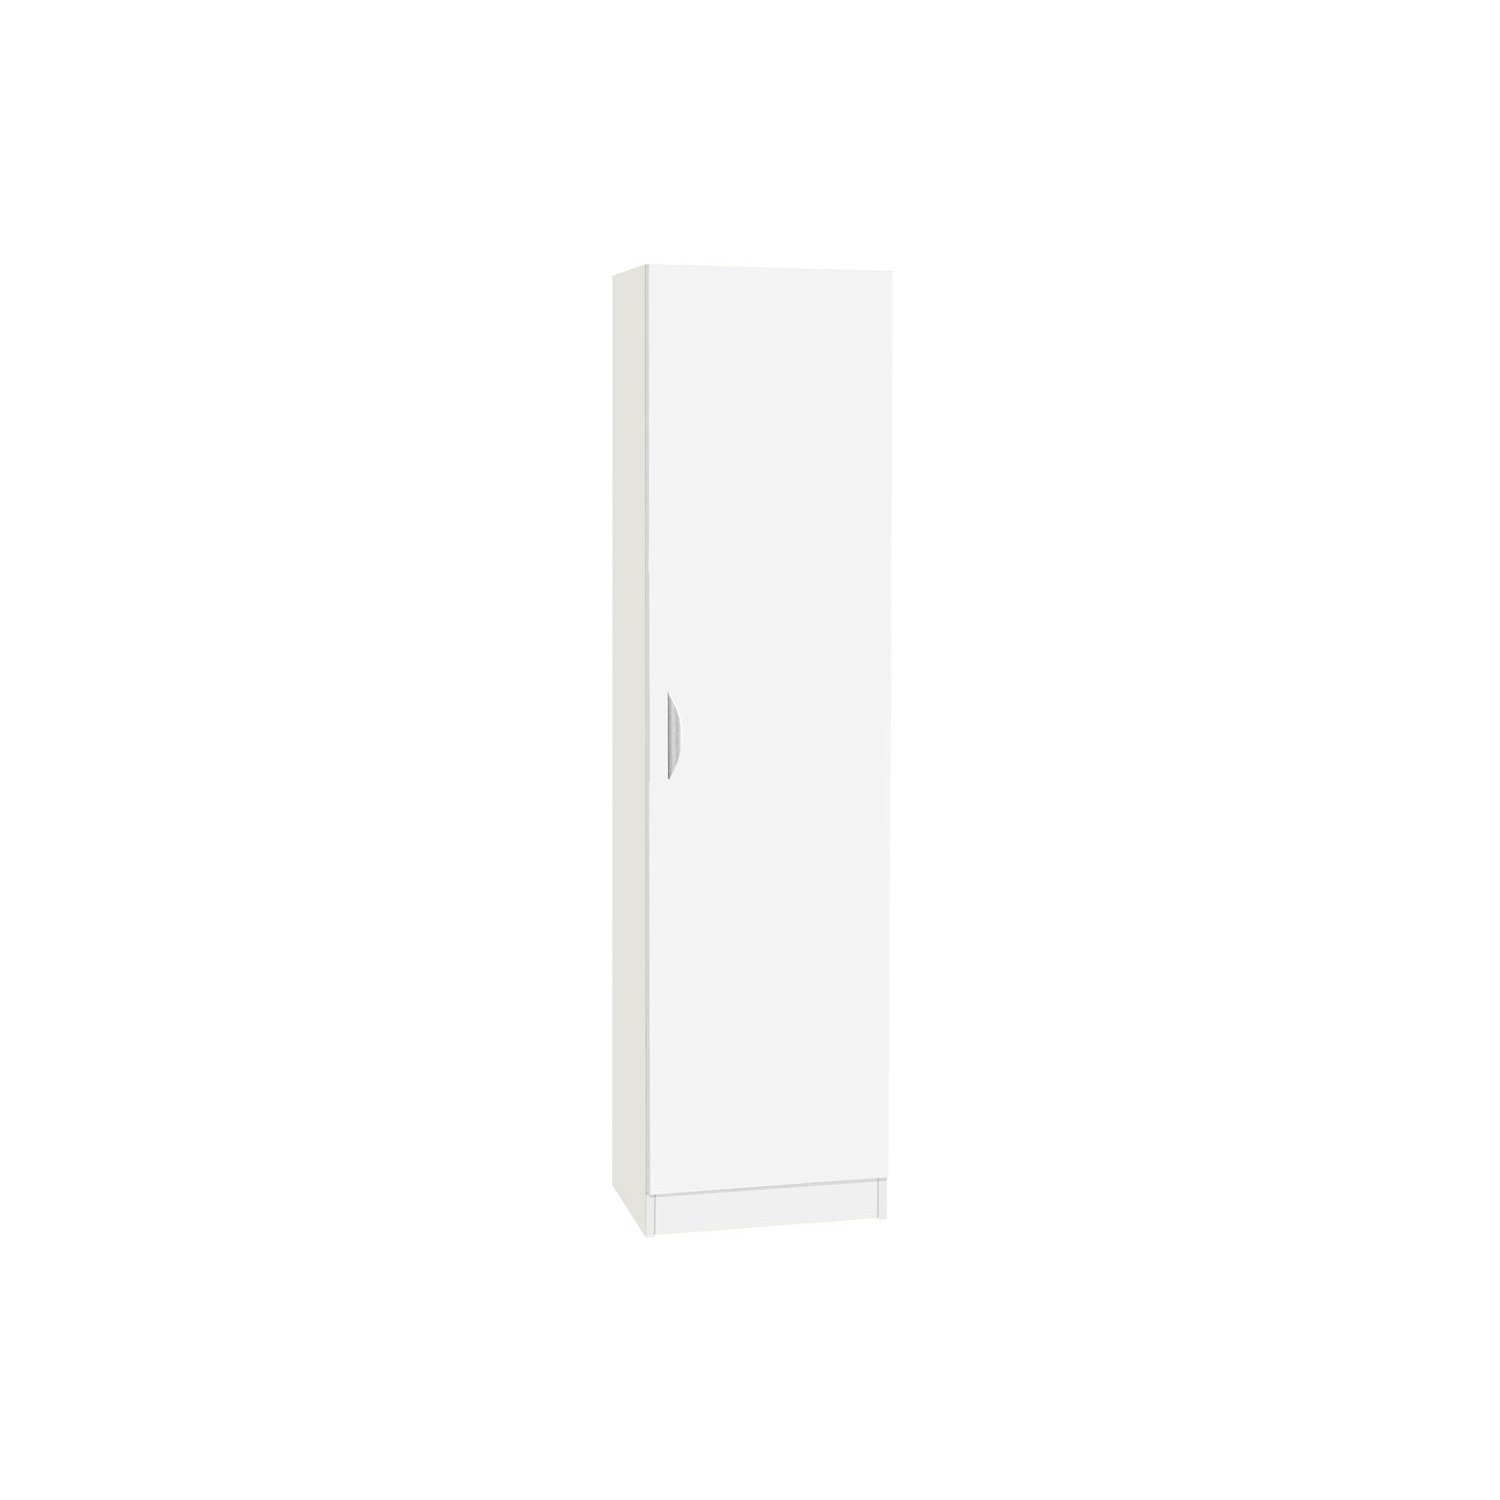 Small Office Tall Storage Cupboard, White